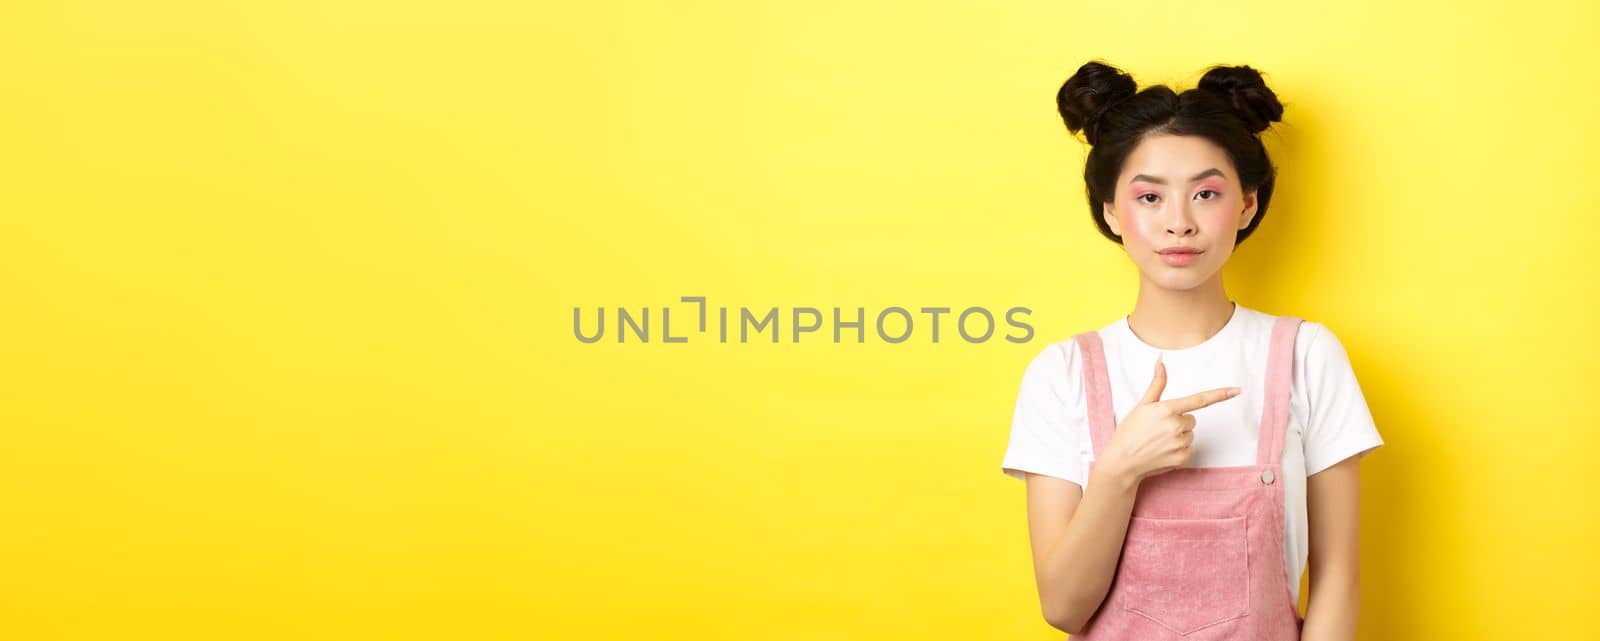 Stylish asian teen girl with makeup and summer clothes, pointing finger right and look serious, standing against yellow background.